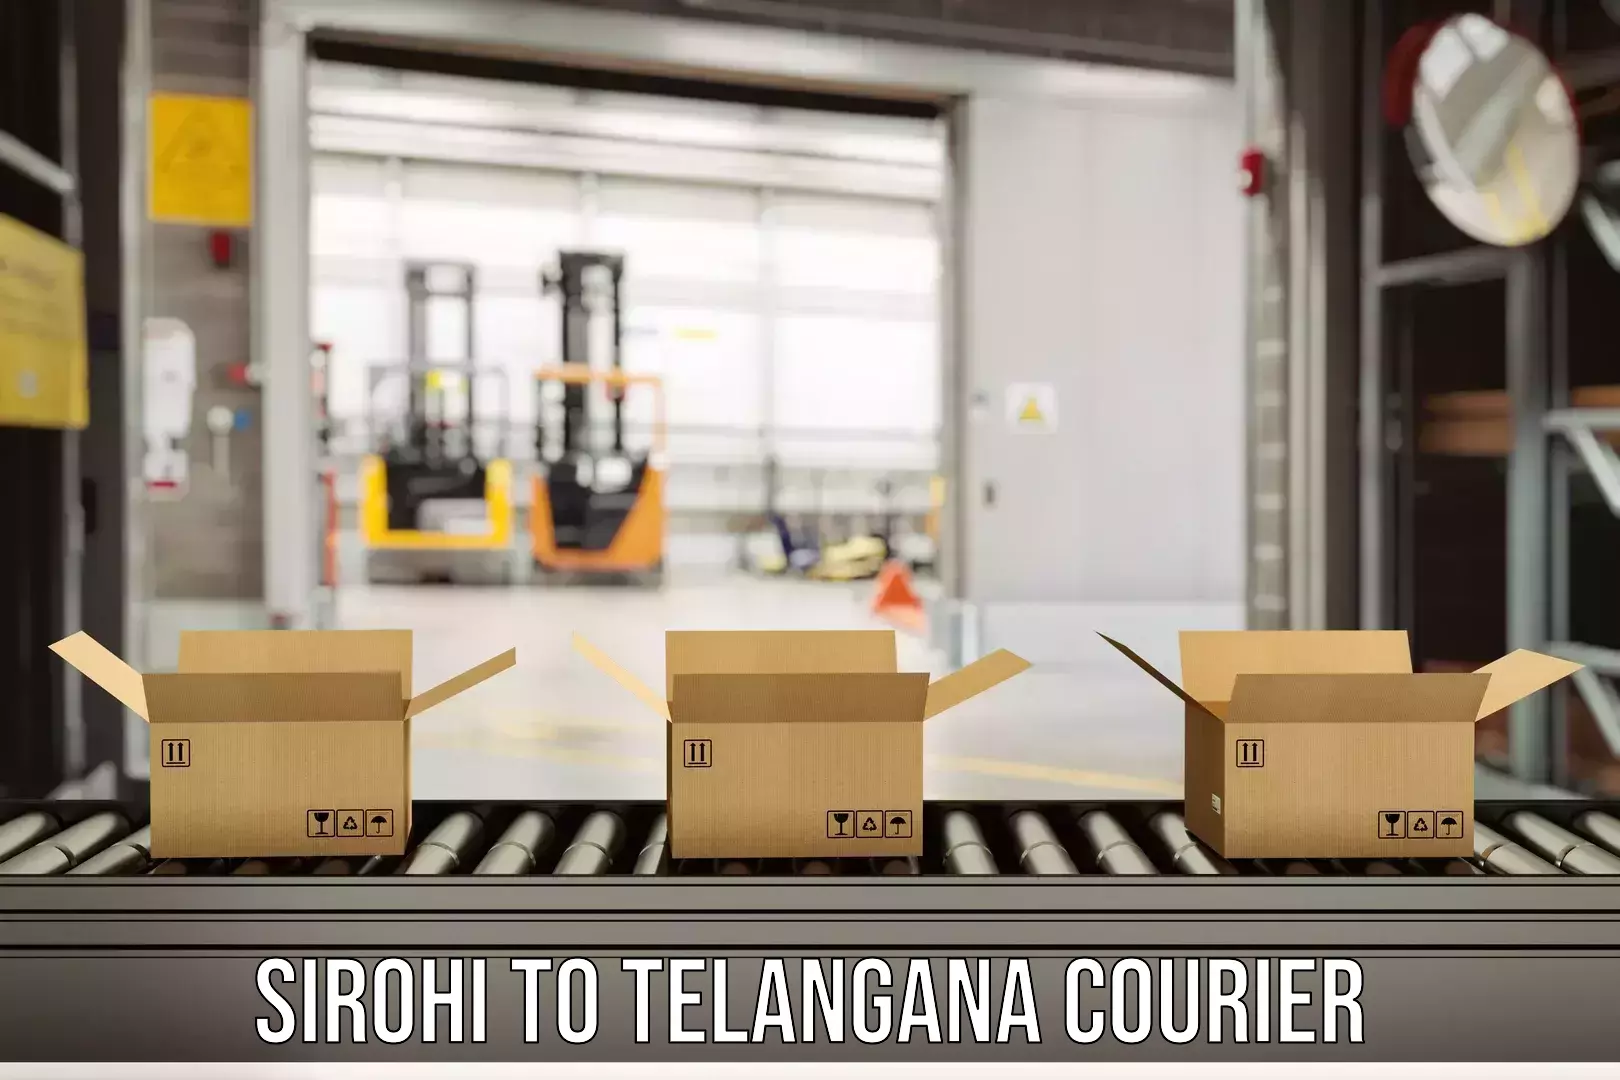 International courier networks Sirohi to Khairatabad